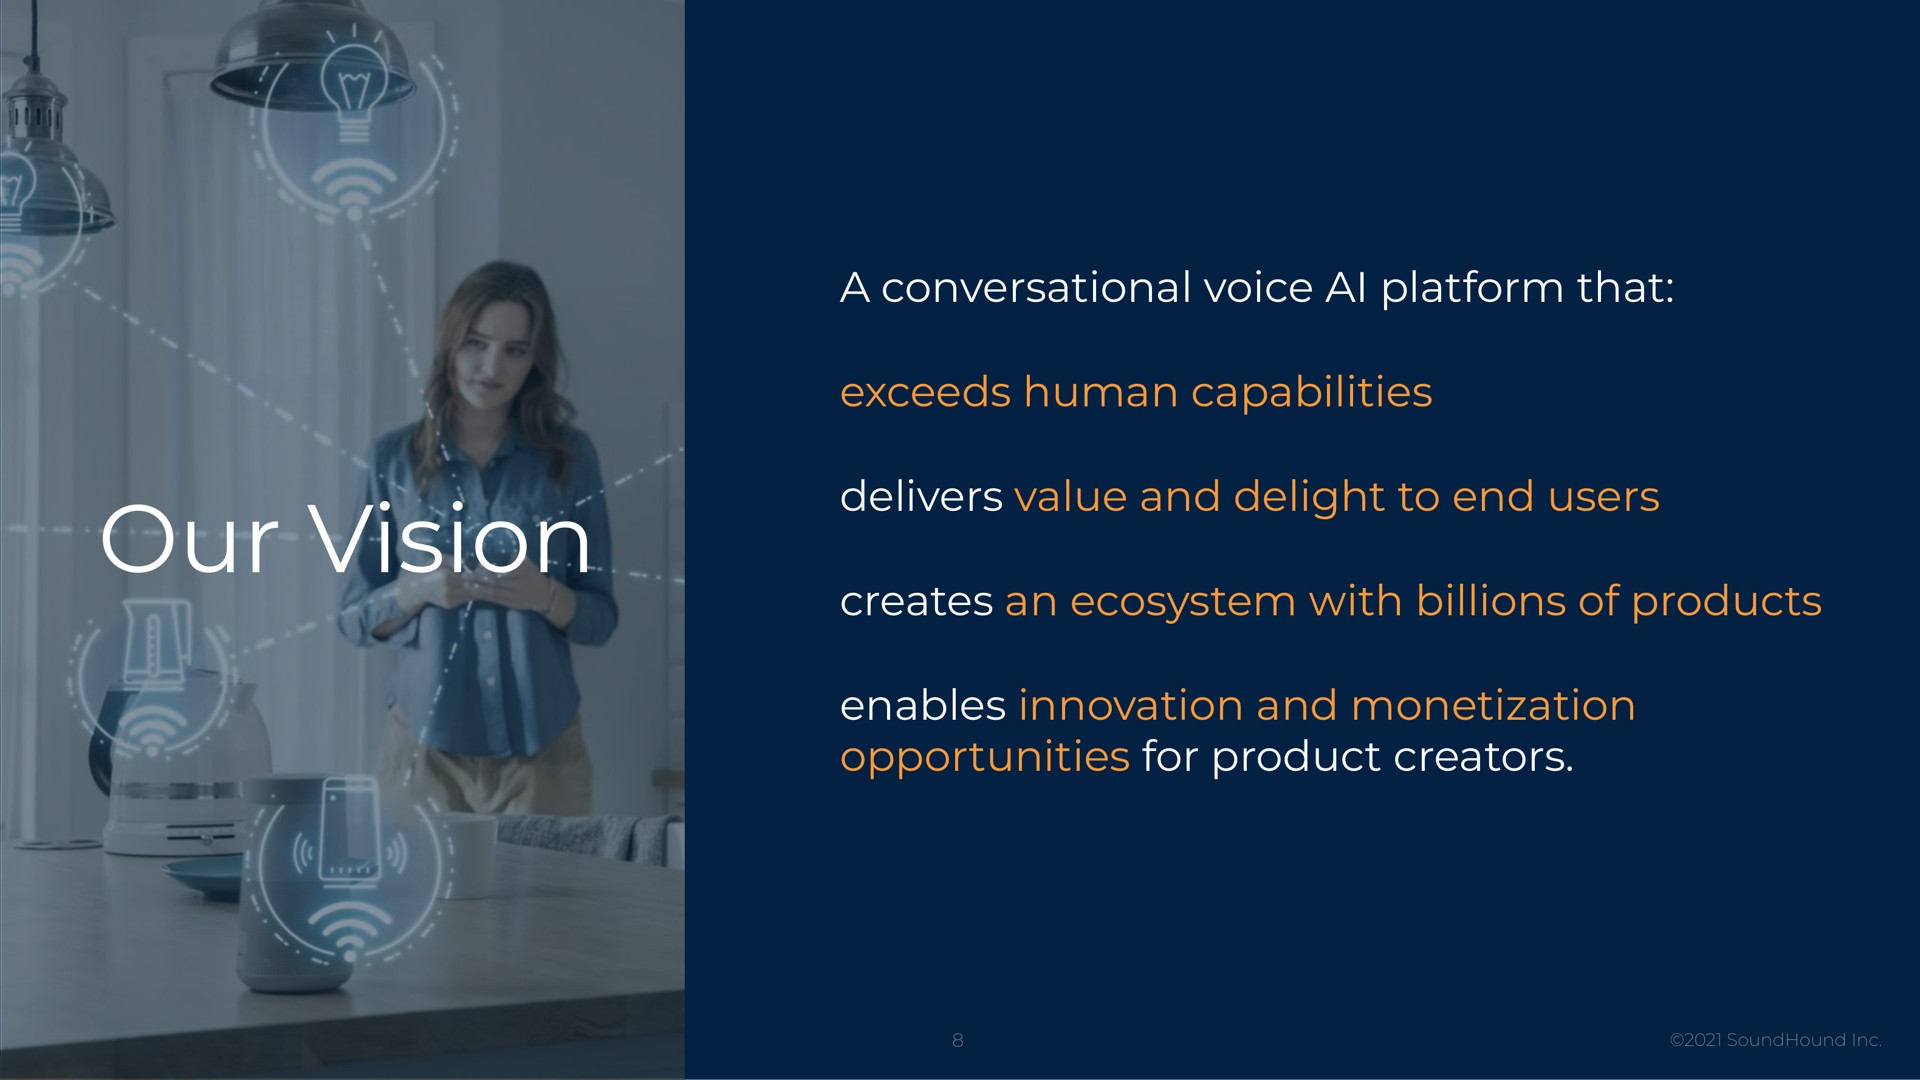 our vision our vision a conversational voice platform that exceeds human capabilities delivers value and delight to end users creates an ecosystem with billions of products enables innovation and monetization opportunities for product creators | SoundHound